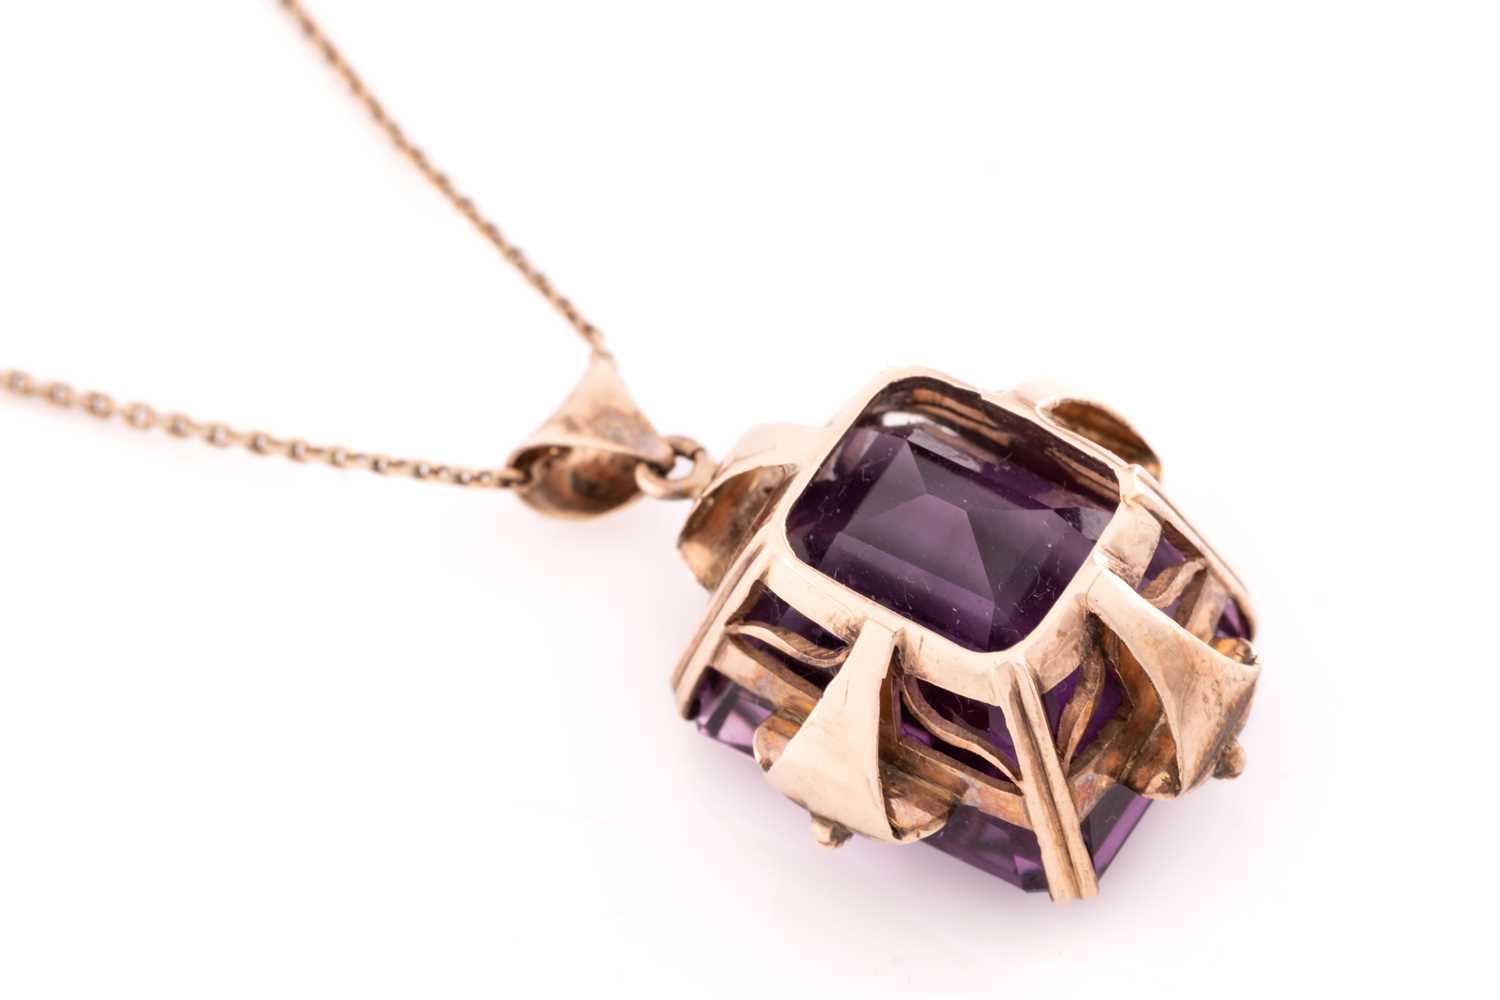 A large amethyst pendant on chain, contains an octagonal step-cut amethyst of 19.6 x 15.9 x 14.2 mm, - Image 5 of 7